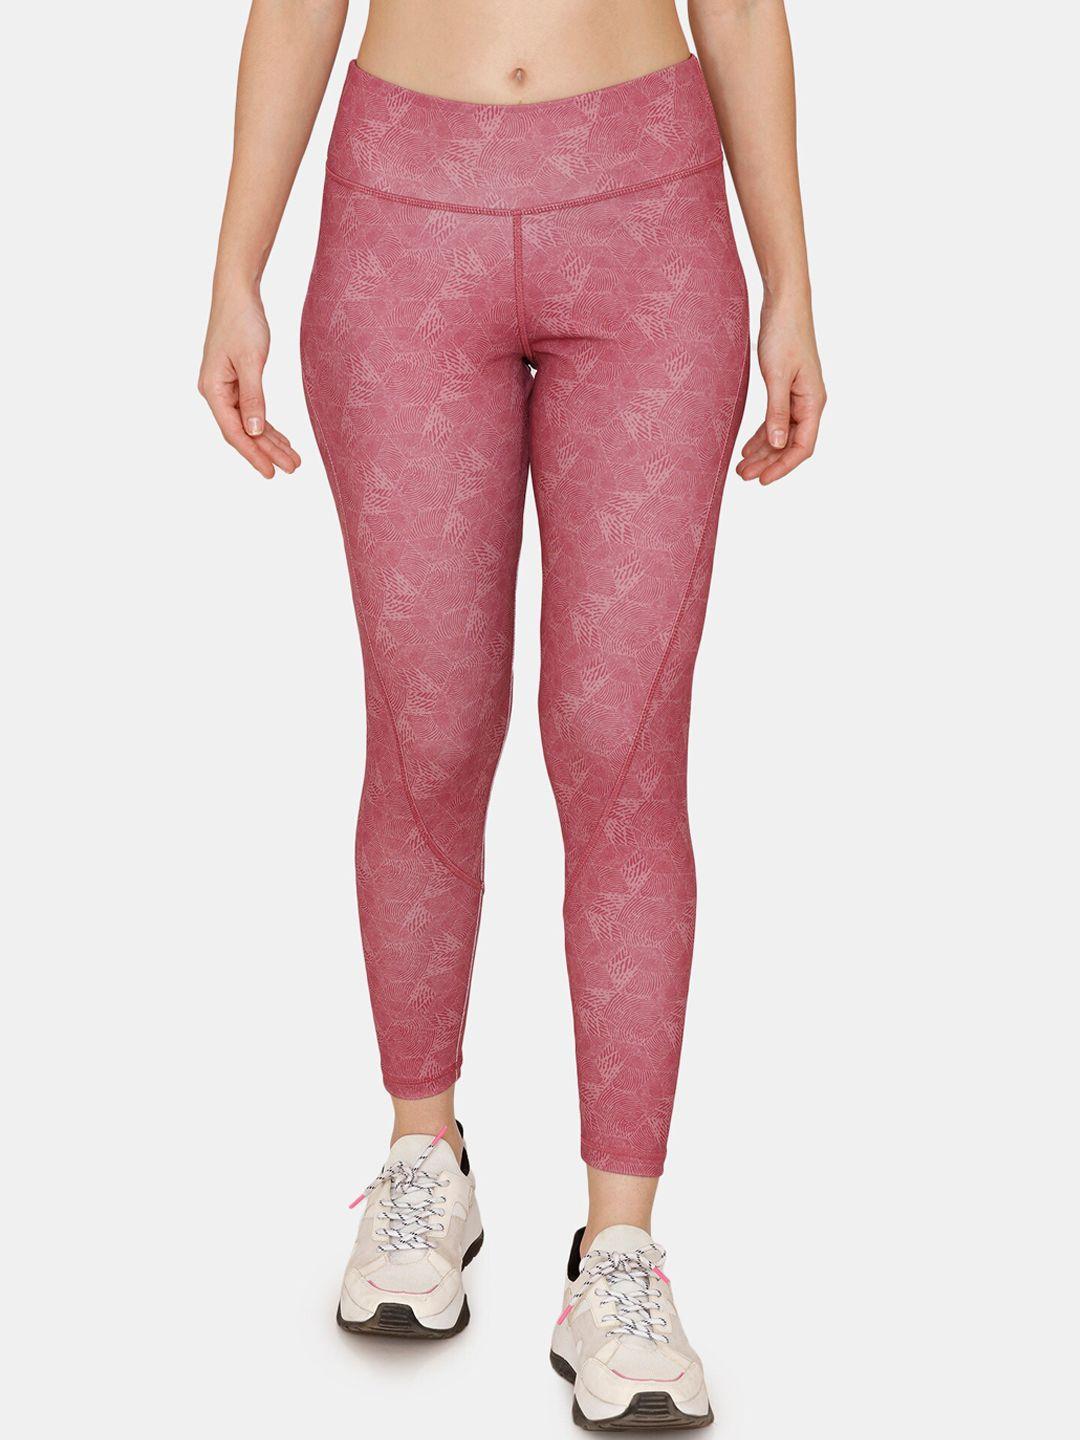 zelocity-by-zivame-women-pink-printed-quick-dry-sports-tights